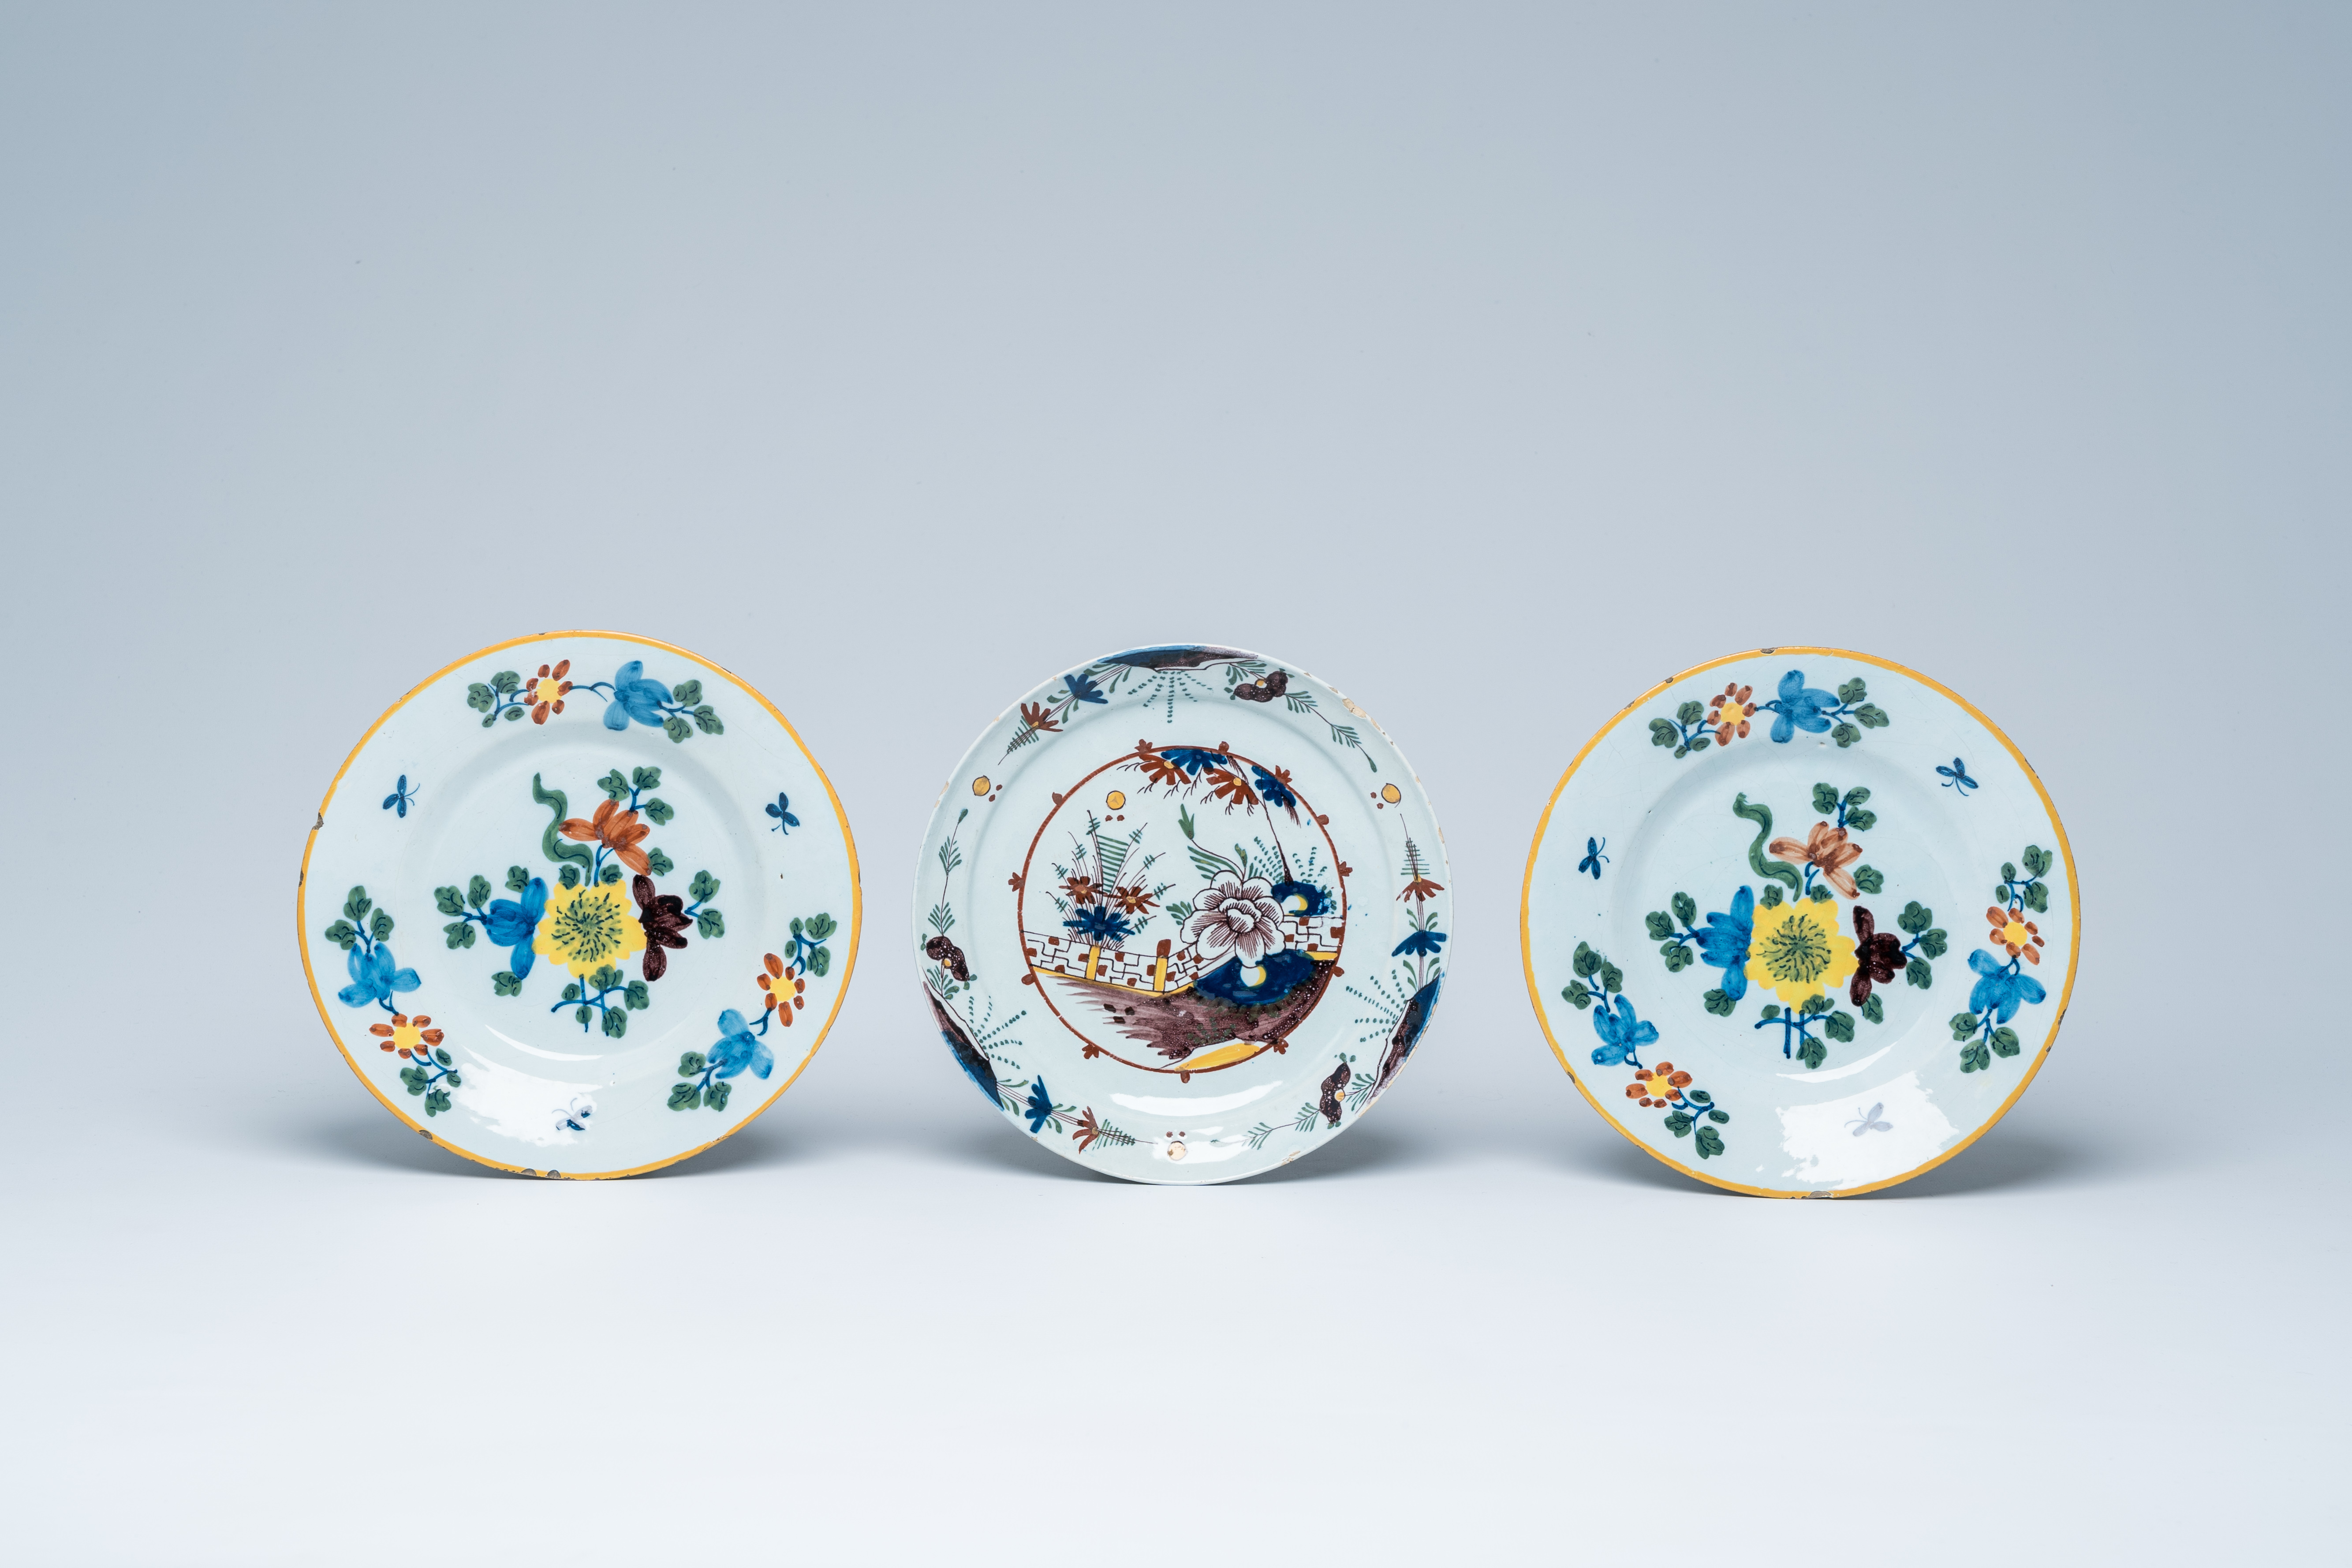 Five polychrome Delft dishes, England and The Netherlands, 18th C. - Image 2 of 5